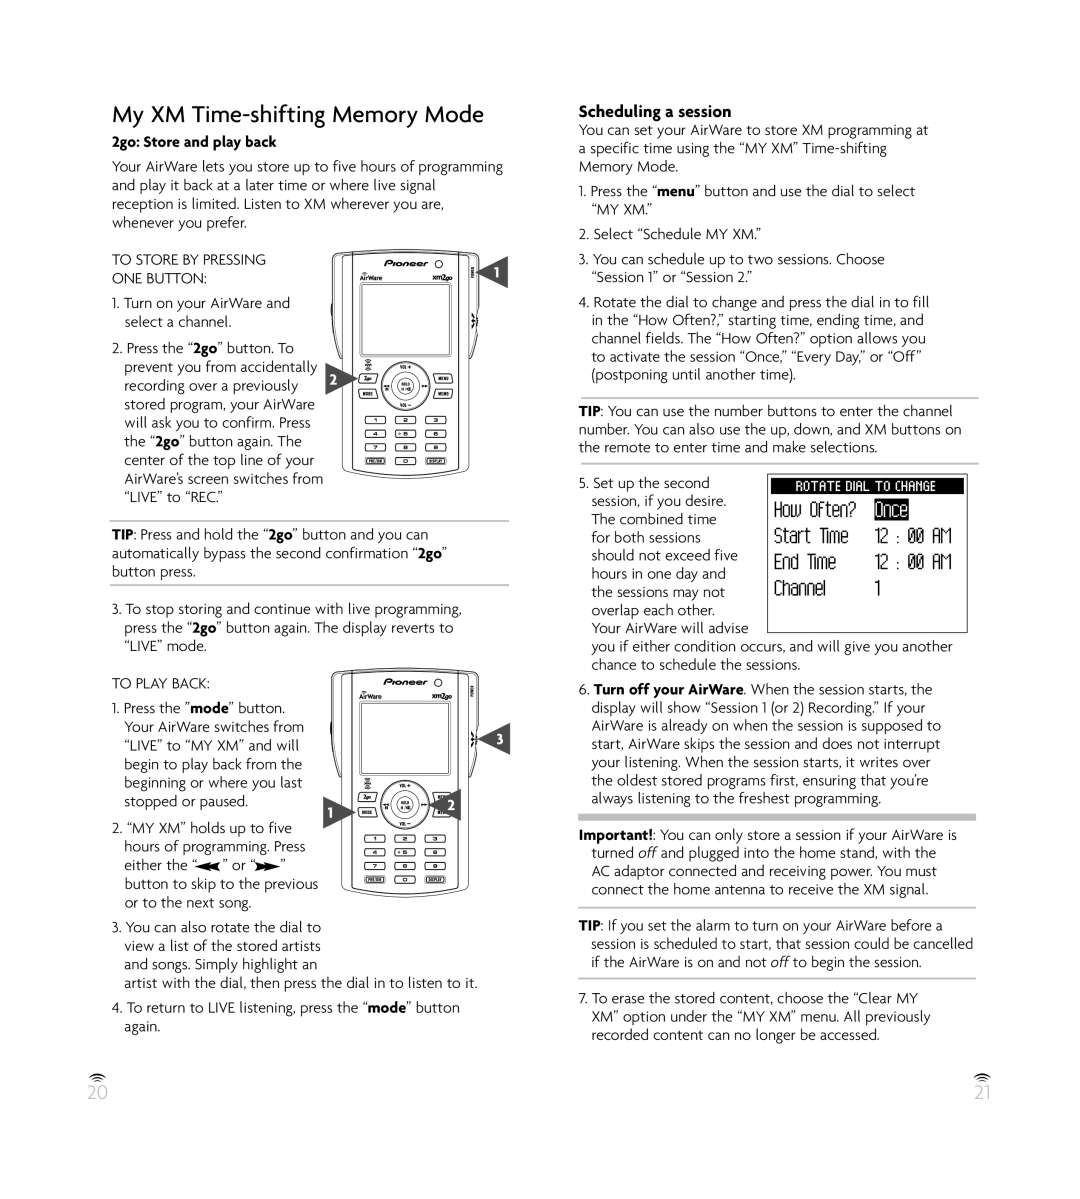 Pioneer GEX-AIRWARE1 manual My XM Time-shiftingMemory Mode, Scheduling a session, 2go Store and play back 